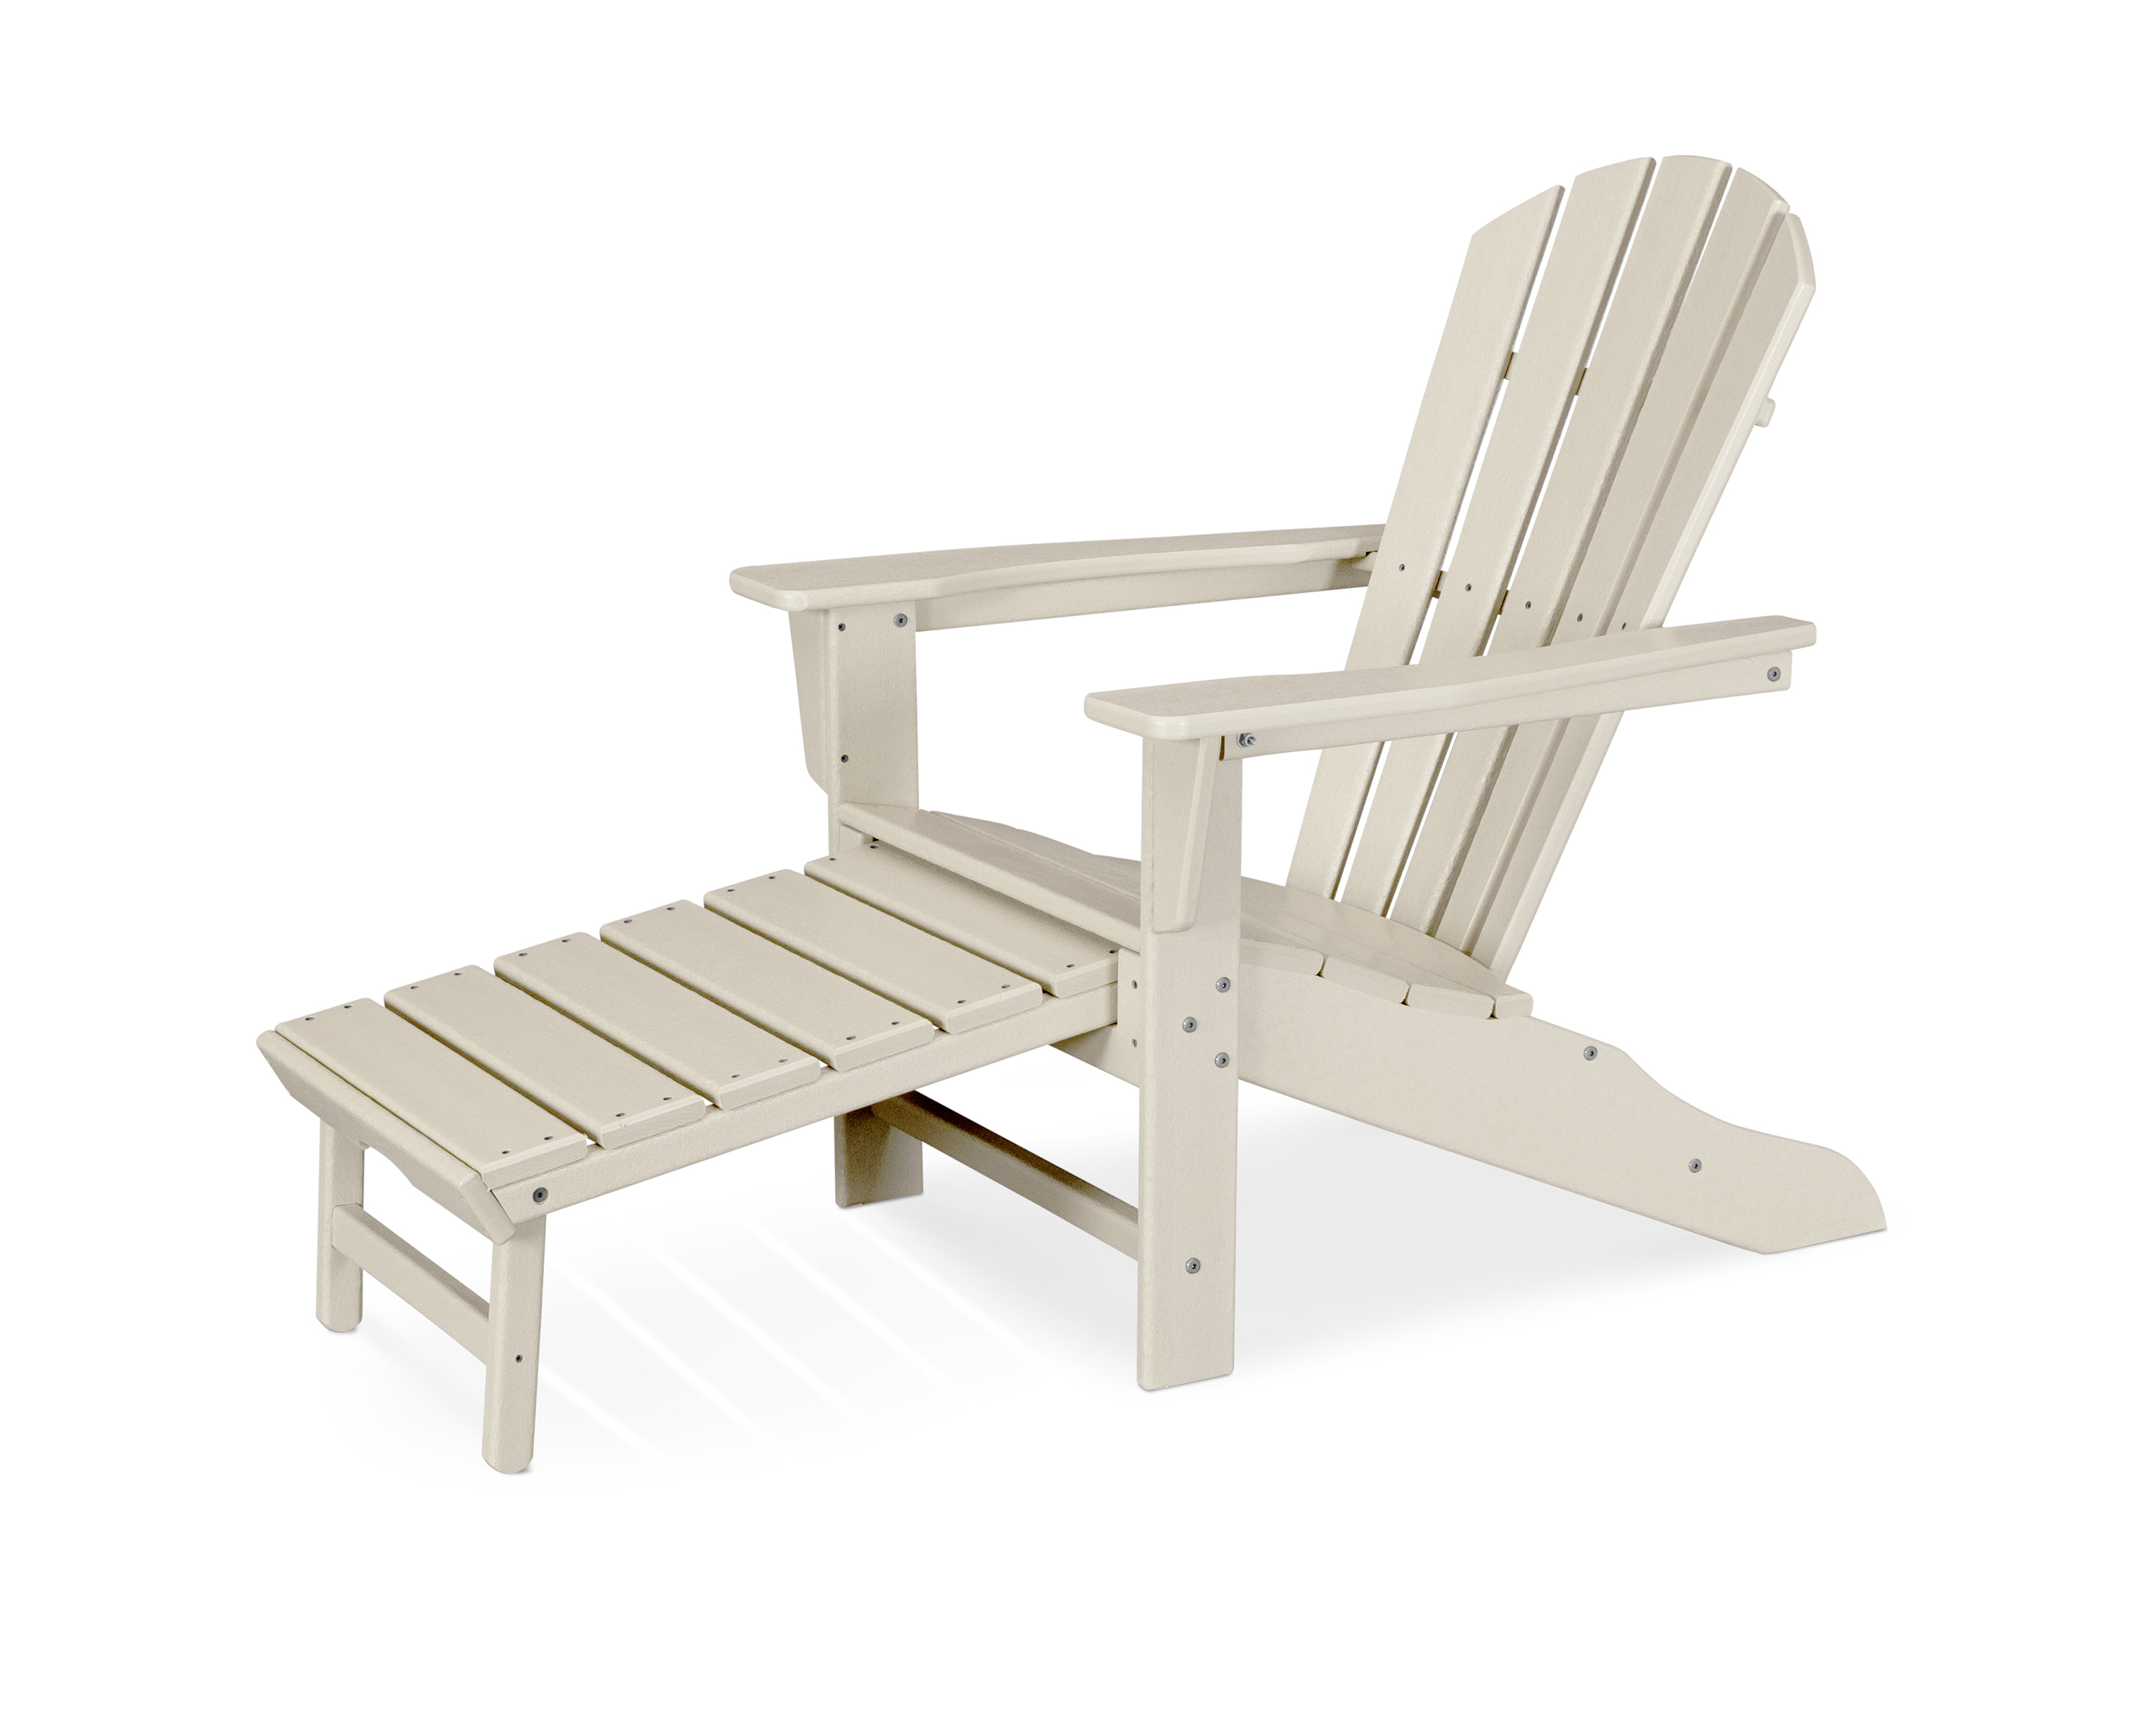 palm coast ultimate adirondack with hideaway ottoman in sand thumbnail image